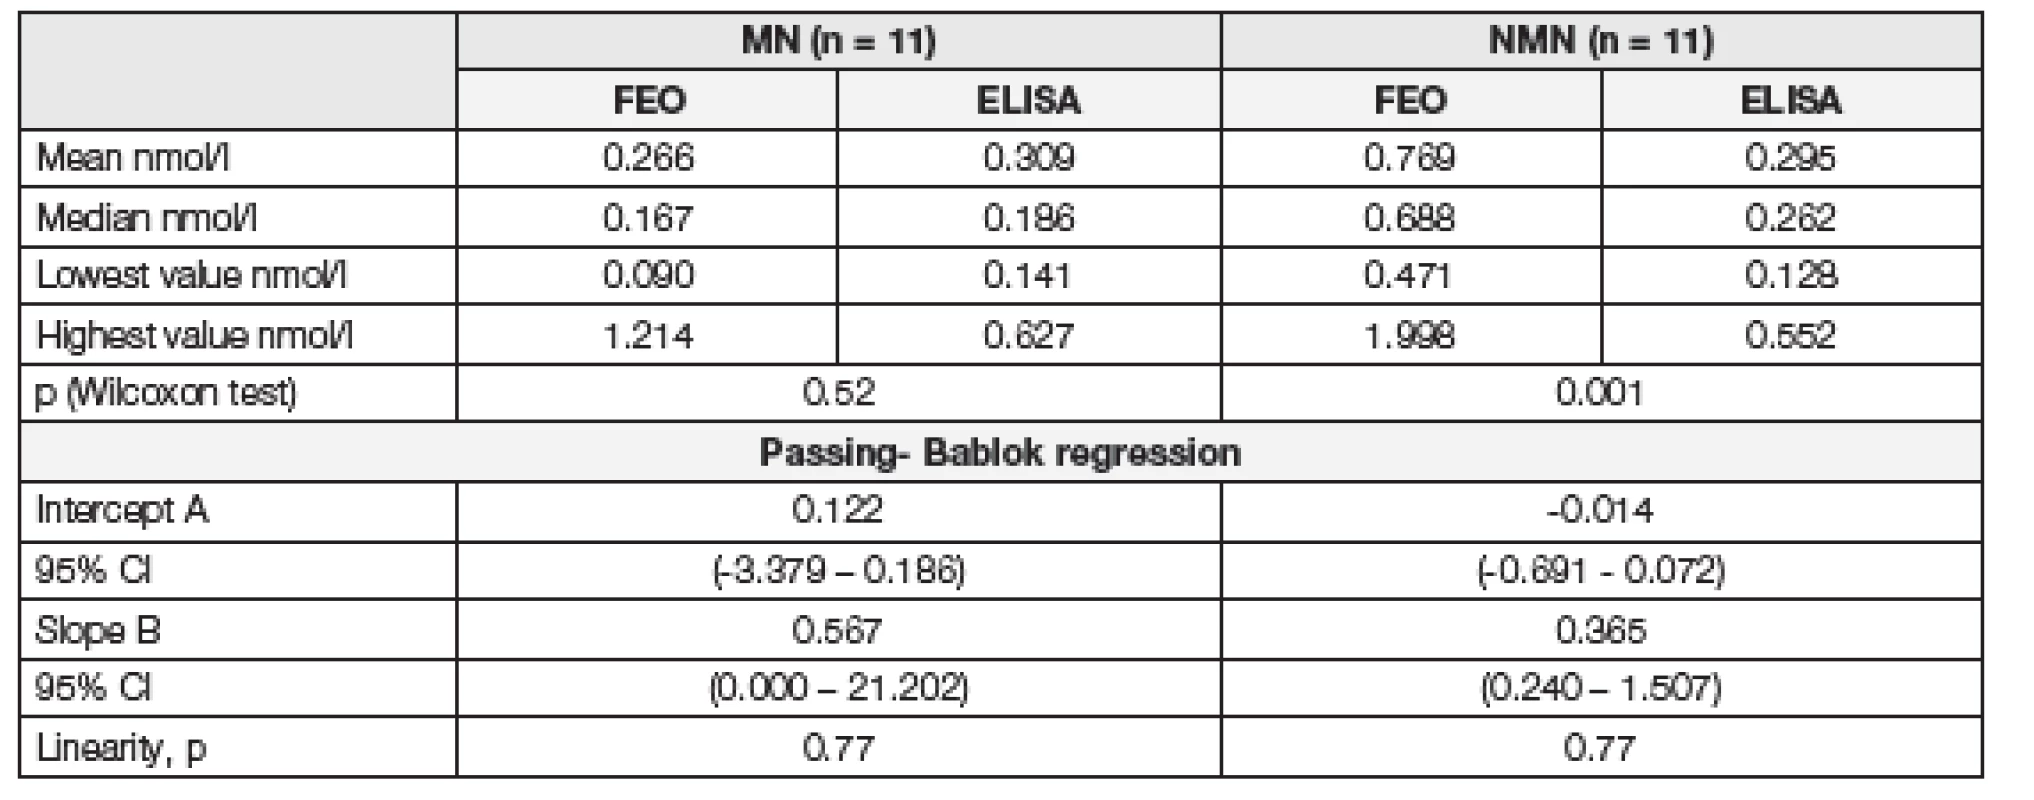 The parameters of statistical analysis for FEO and ELISA methods